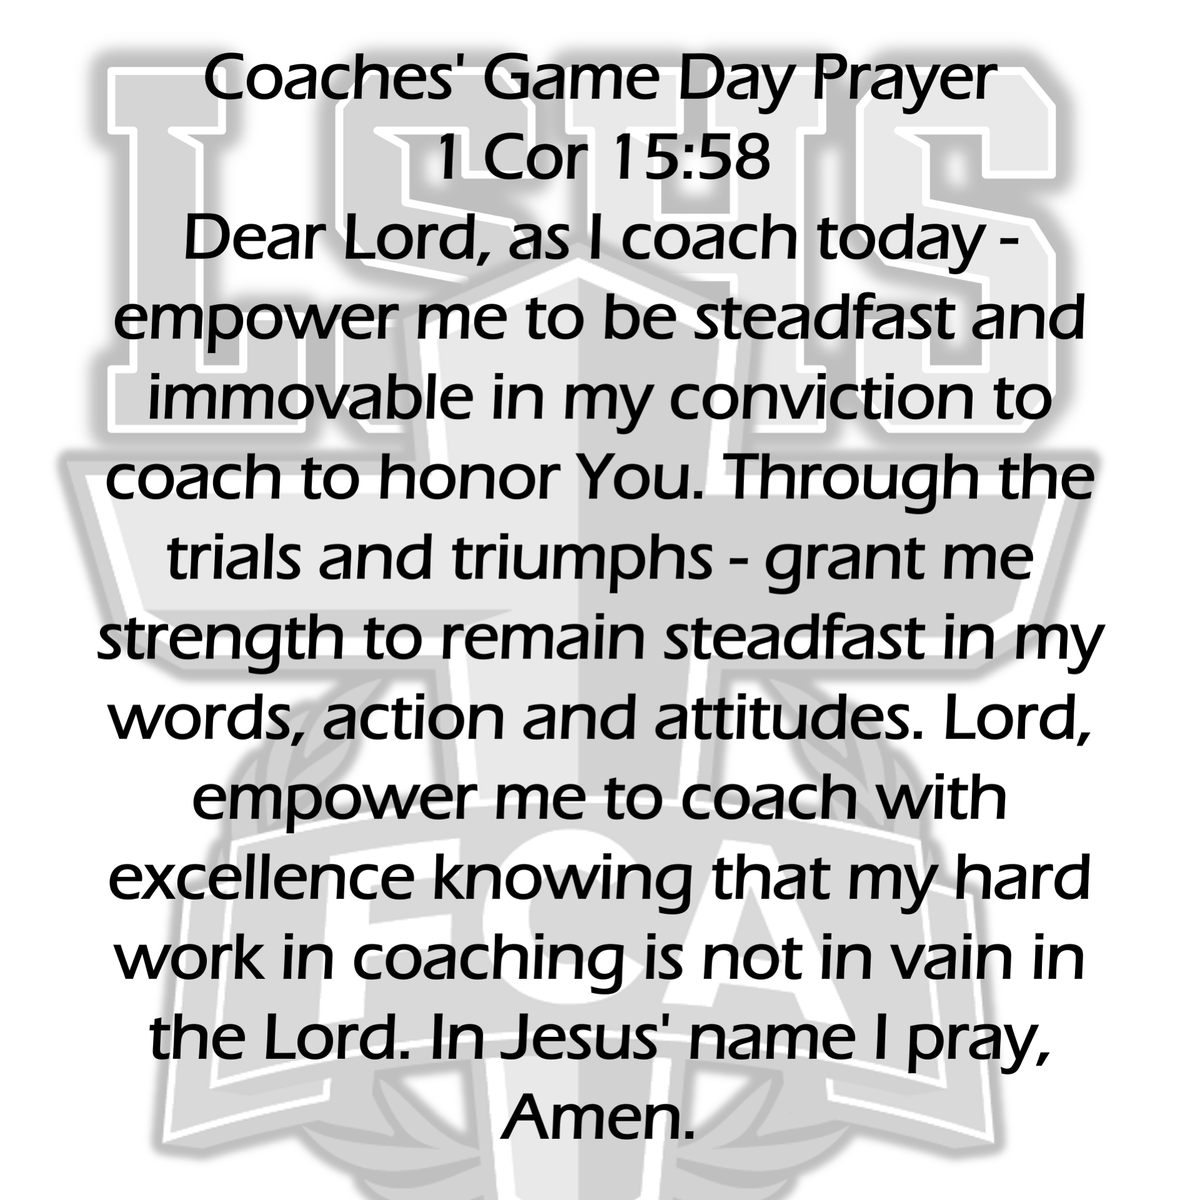 May God bless all my coaches in this great fraternity tonight. Win or Lose may we Coach to honor him.